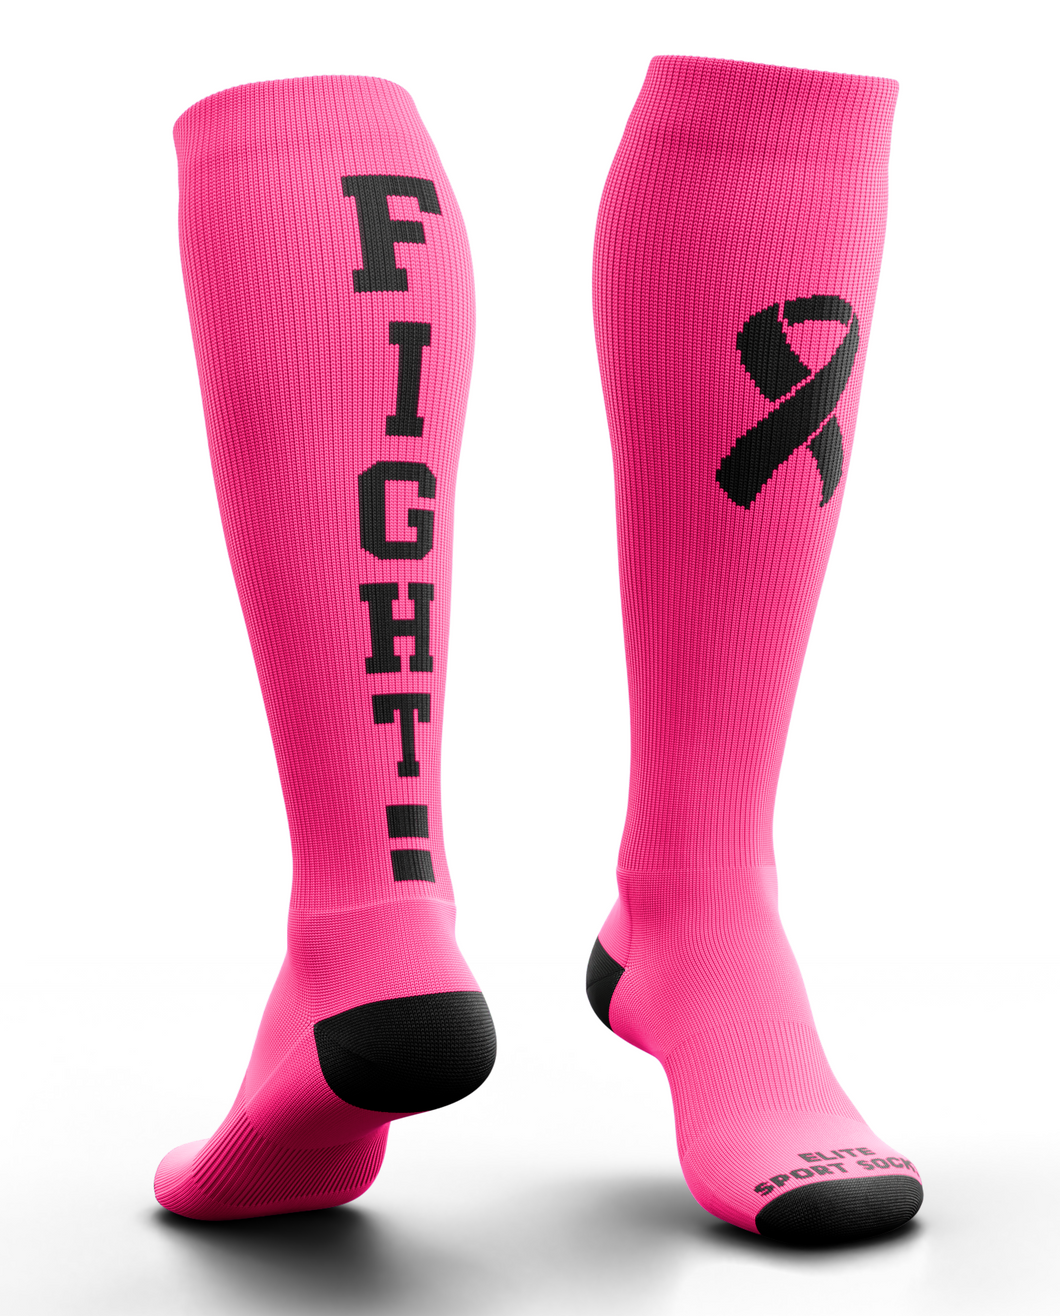 Breast Cancer Awareness Socks (Knee-High, Ribbed Knit, Bright Pink)